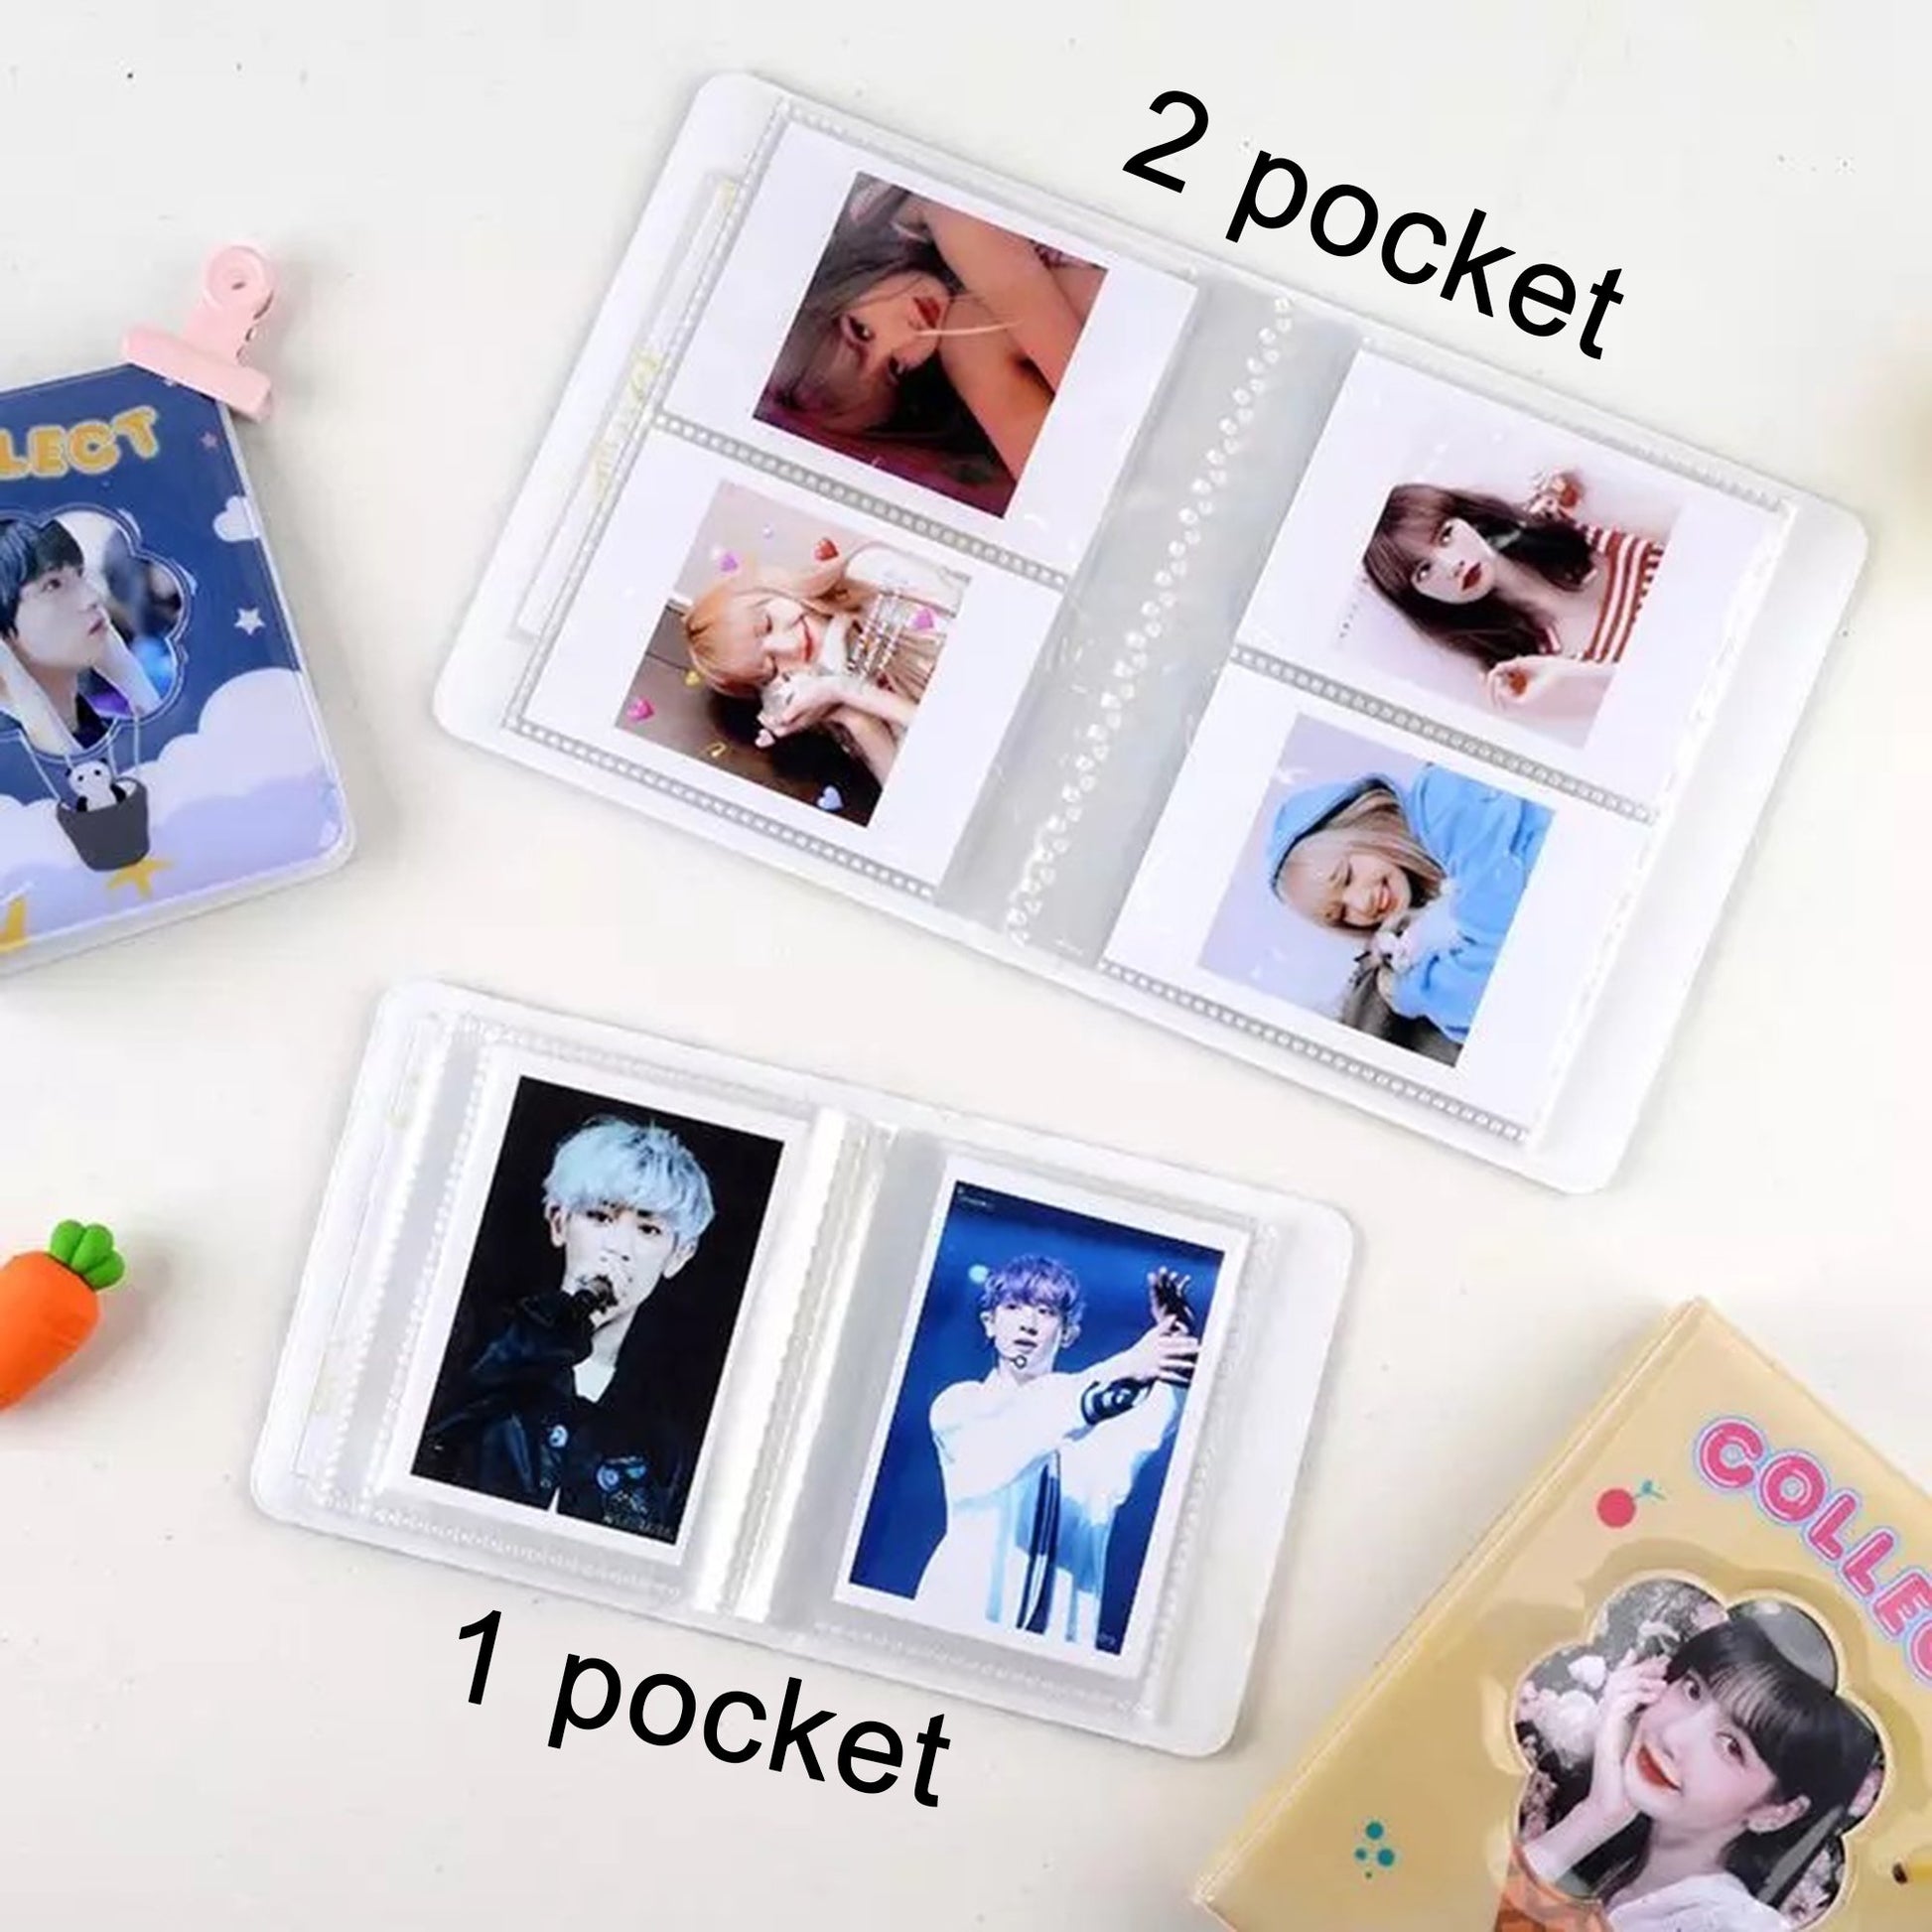 is this photocard book pvc? how do you tell what is pvc or not? : r/kpophelp